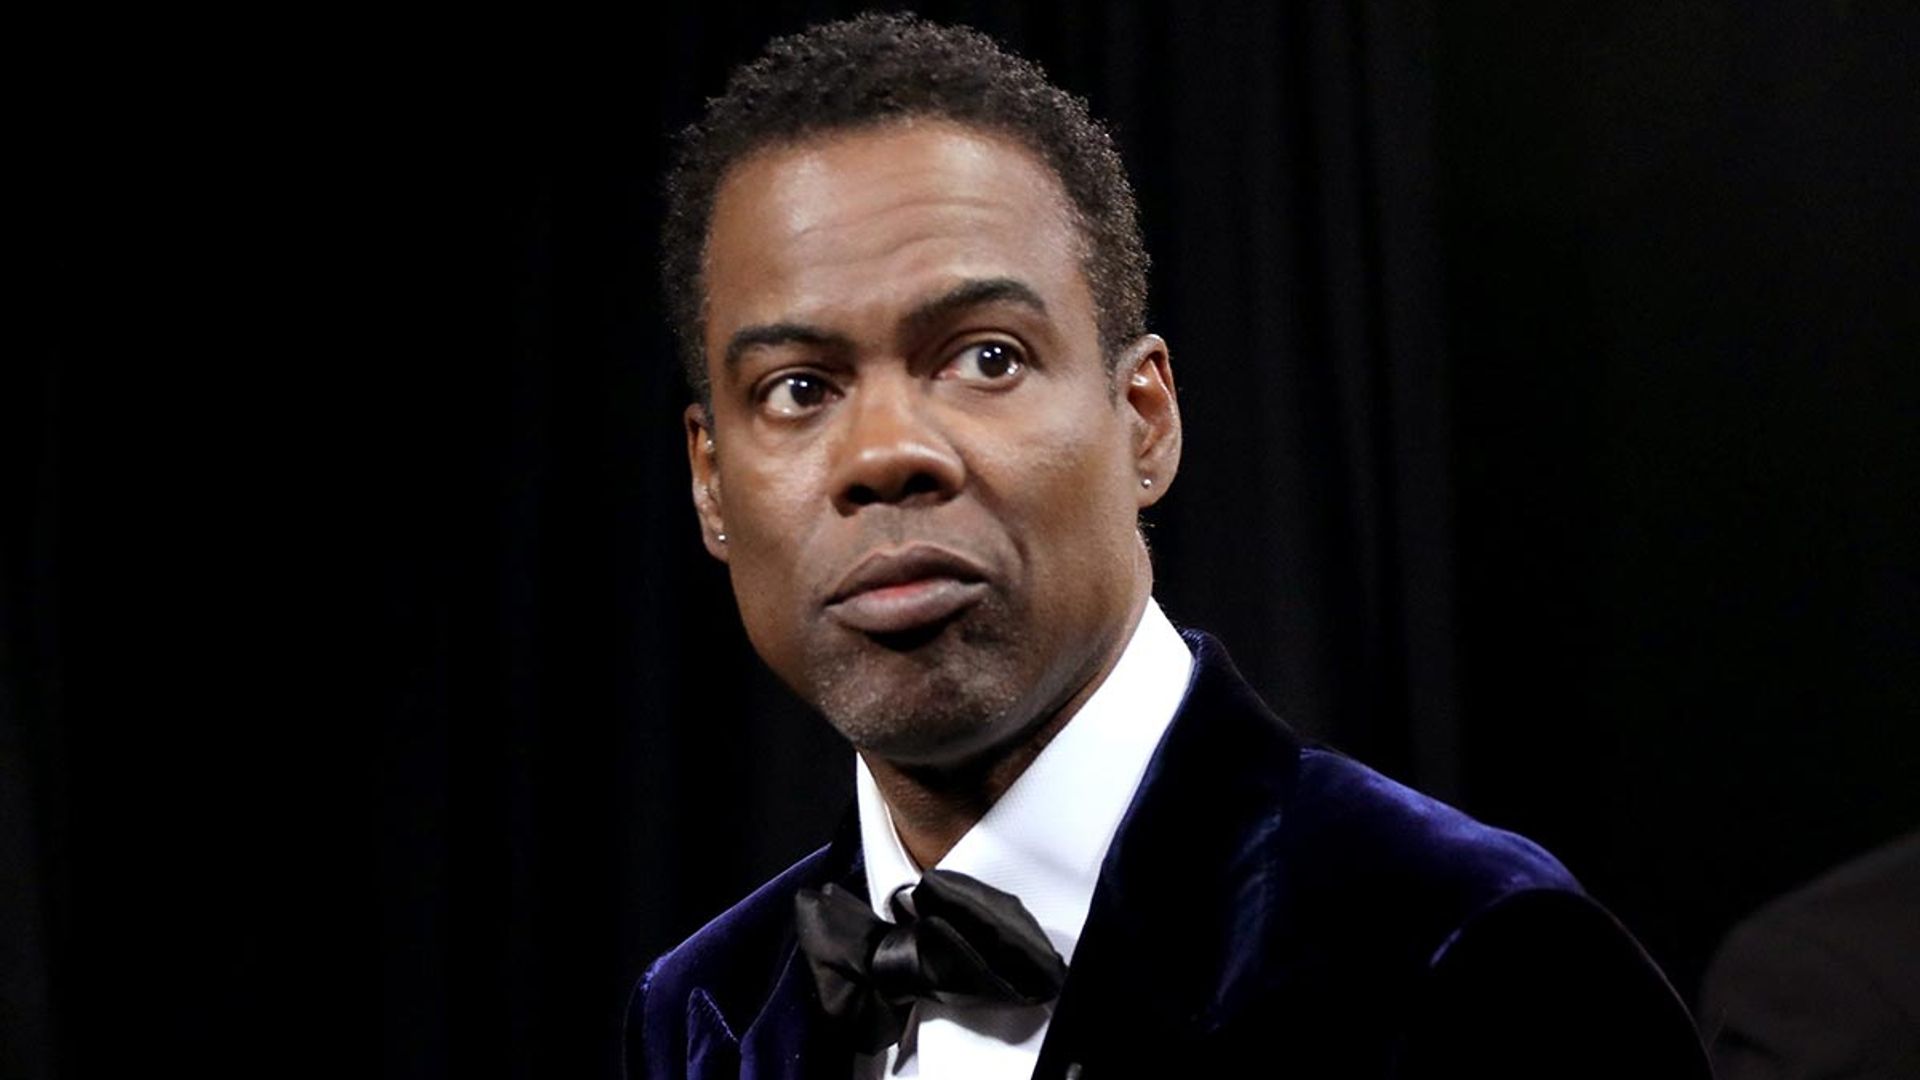 Chris Rock breaks silence on Will Smith Oscars altercation: 'I'm still processing what happened'